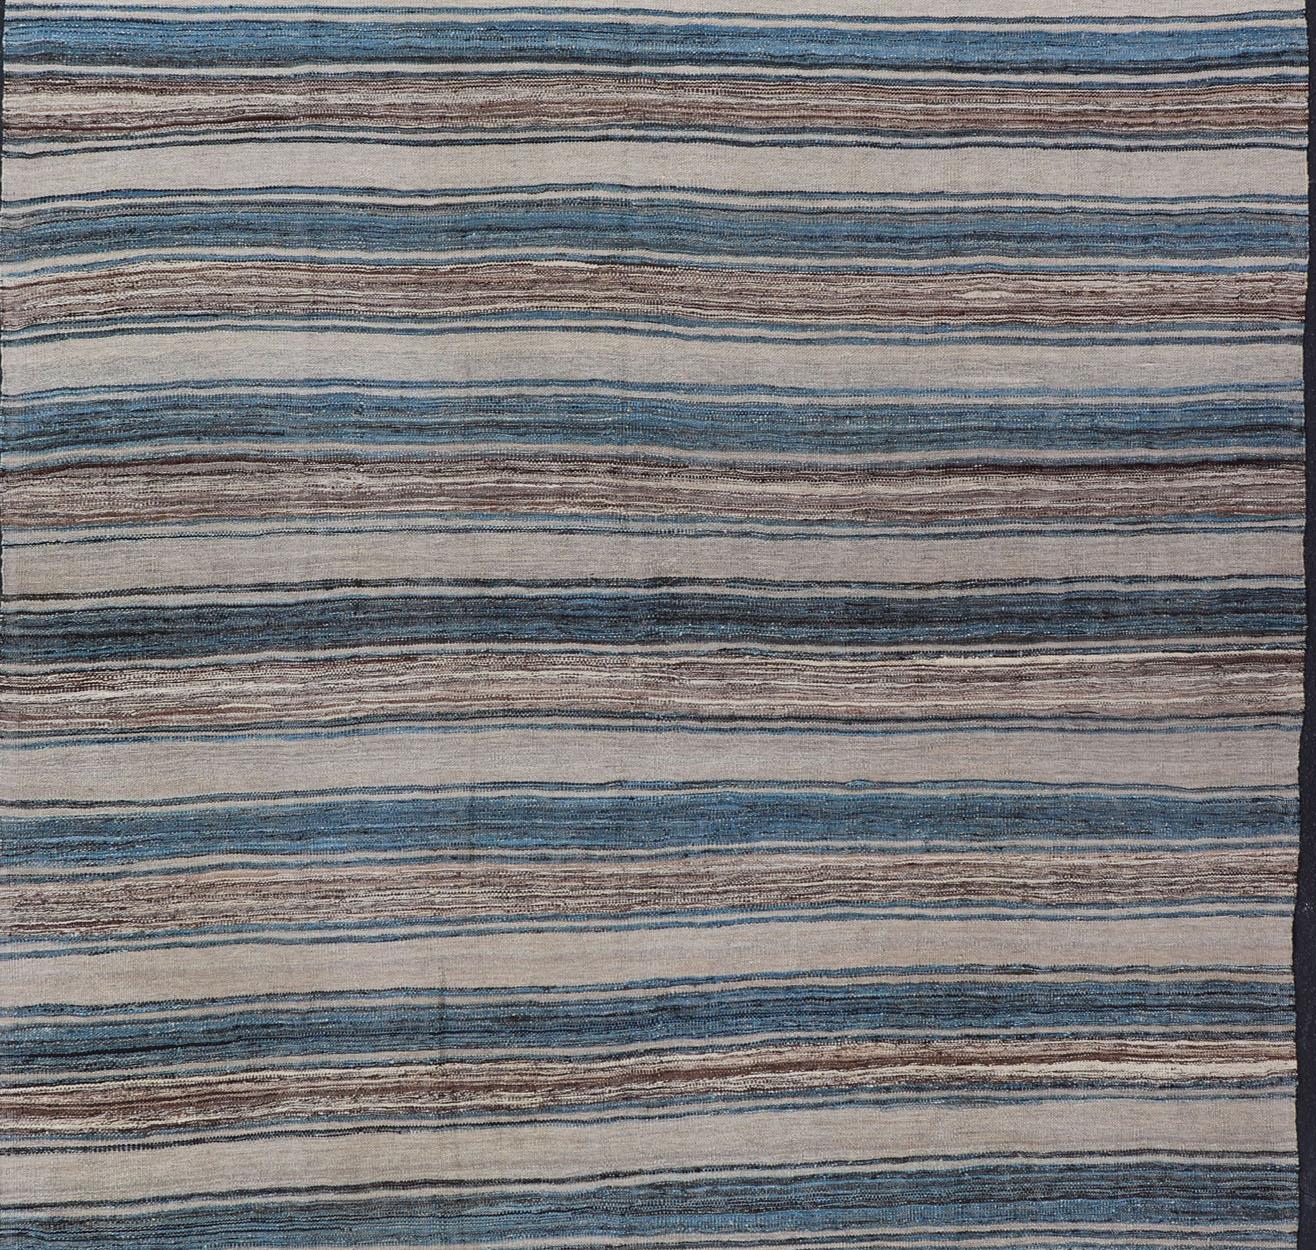 Afghan Versatile Striped Design and Natural Brown, Cream, and Blue Flat-Weave Kilim For Sale